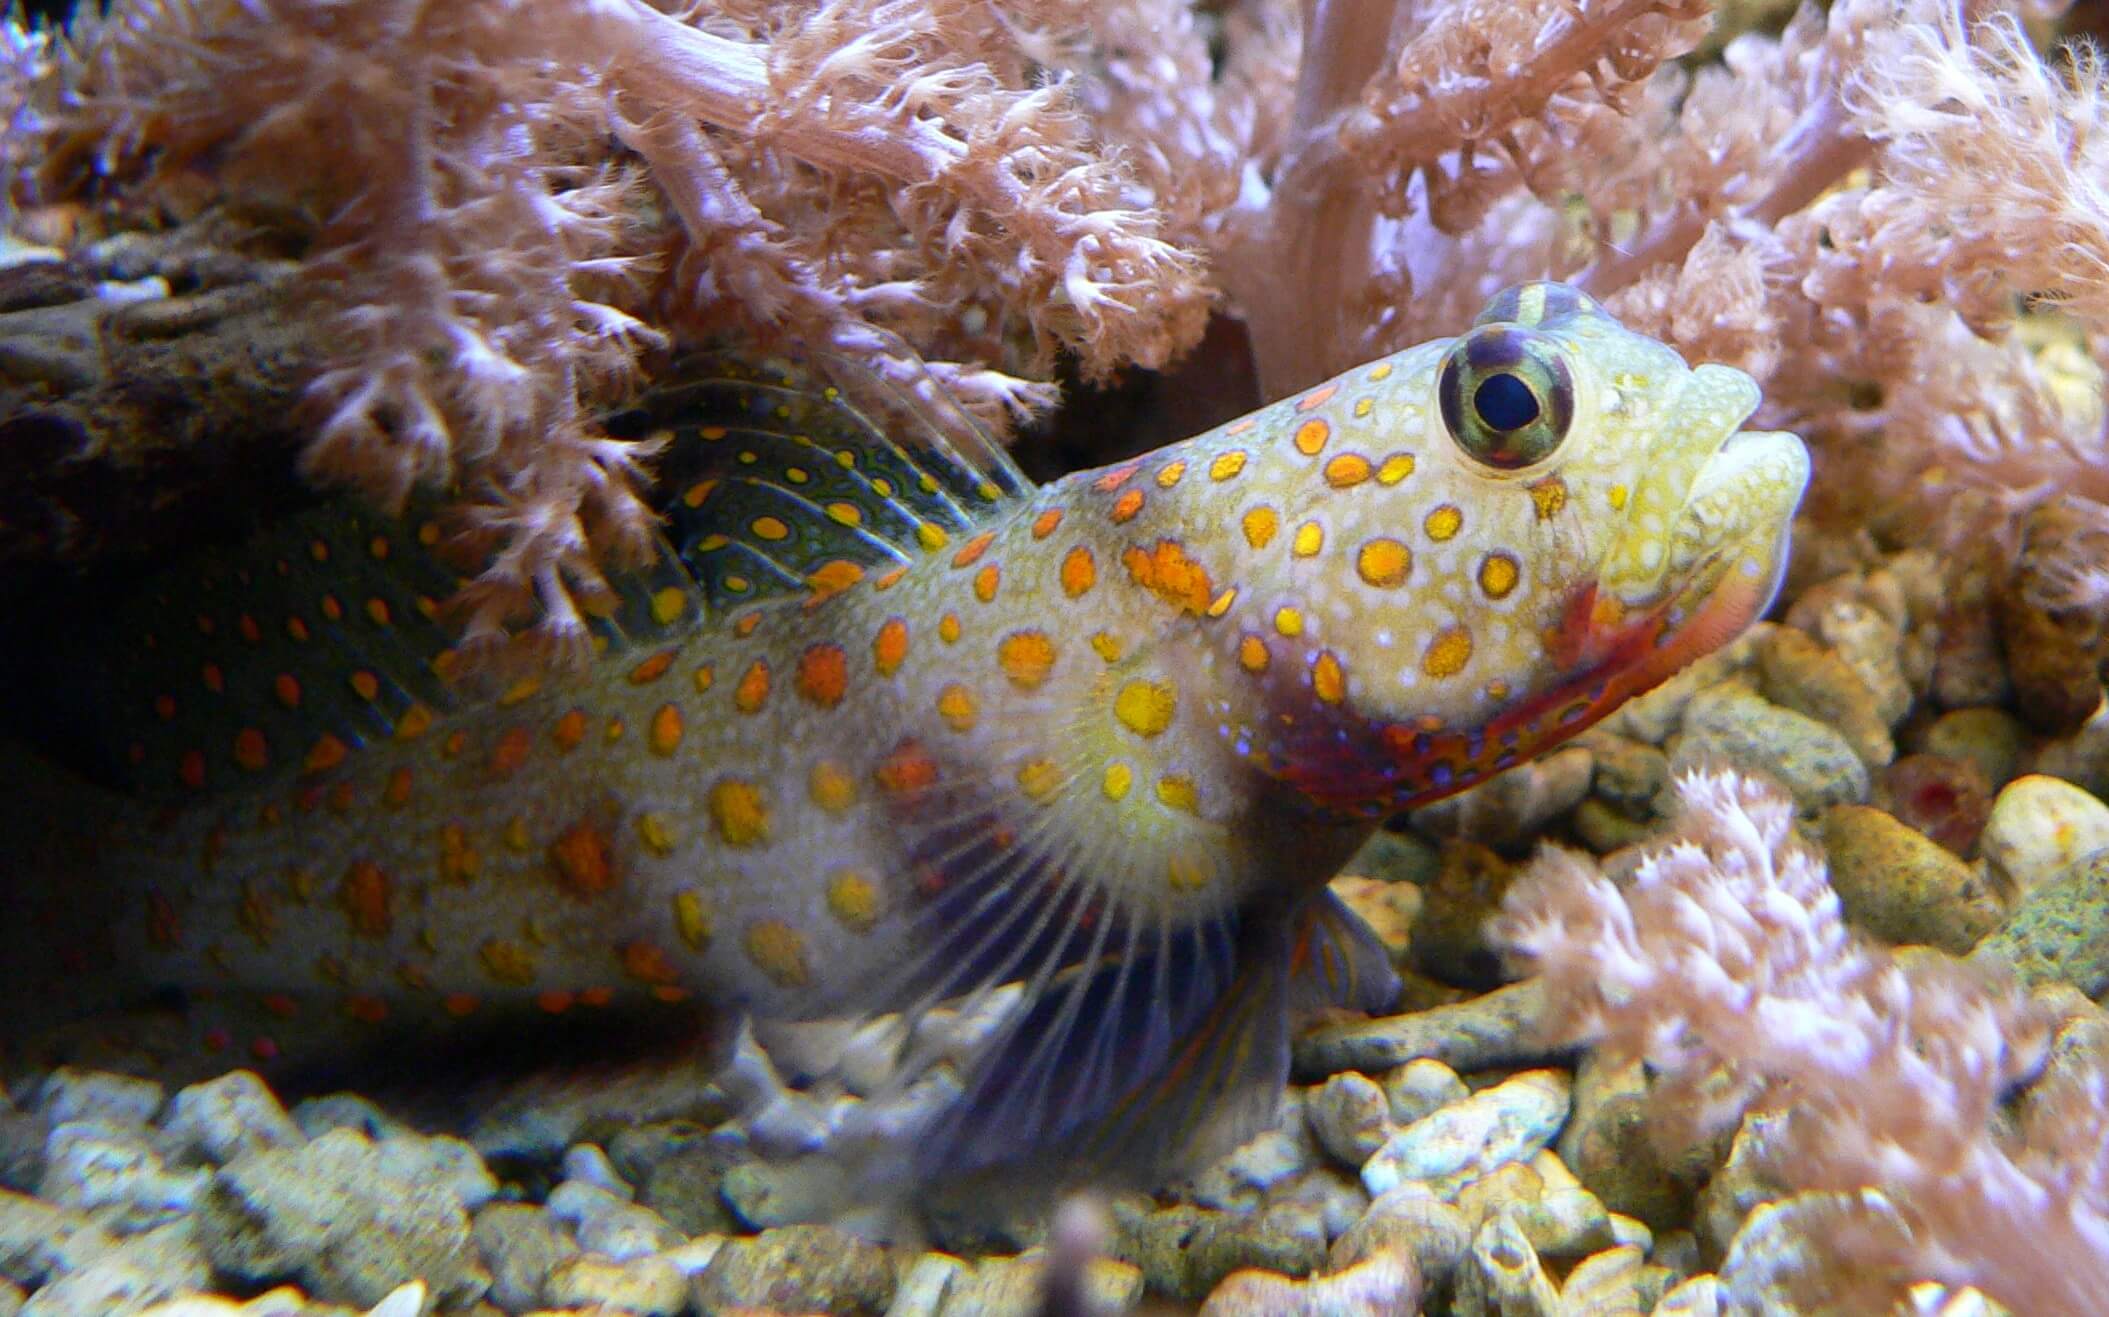 Image of an Orange Spotted Goby